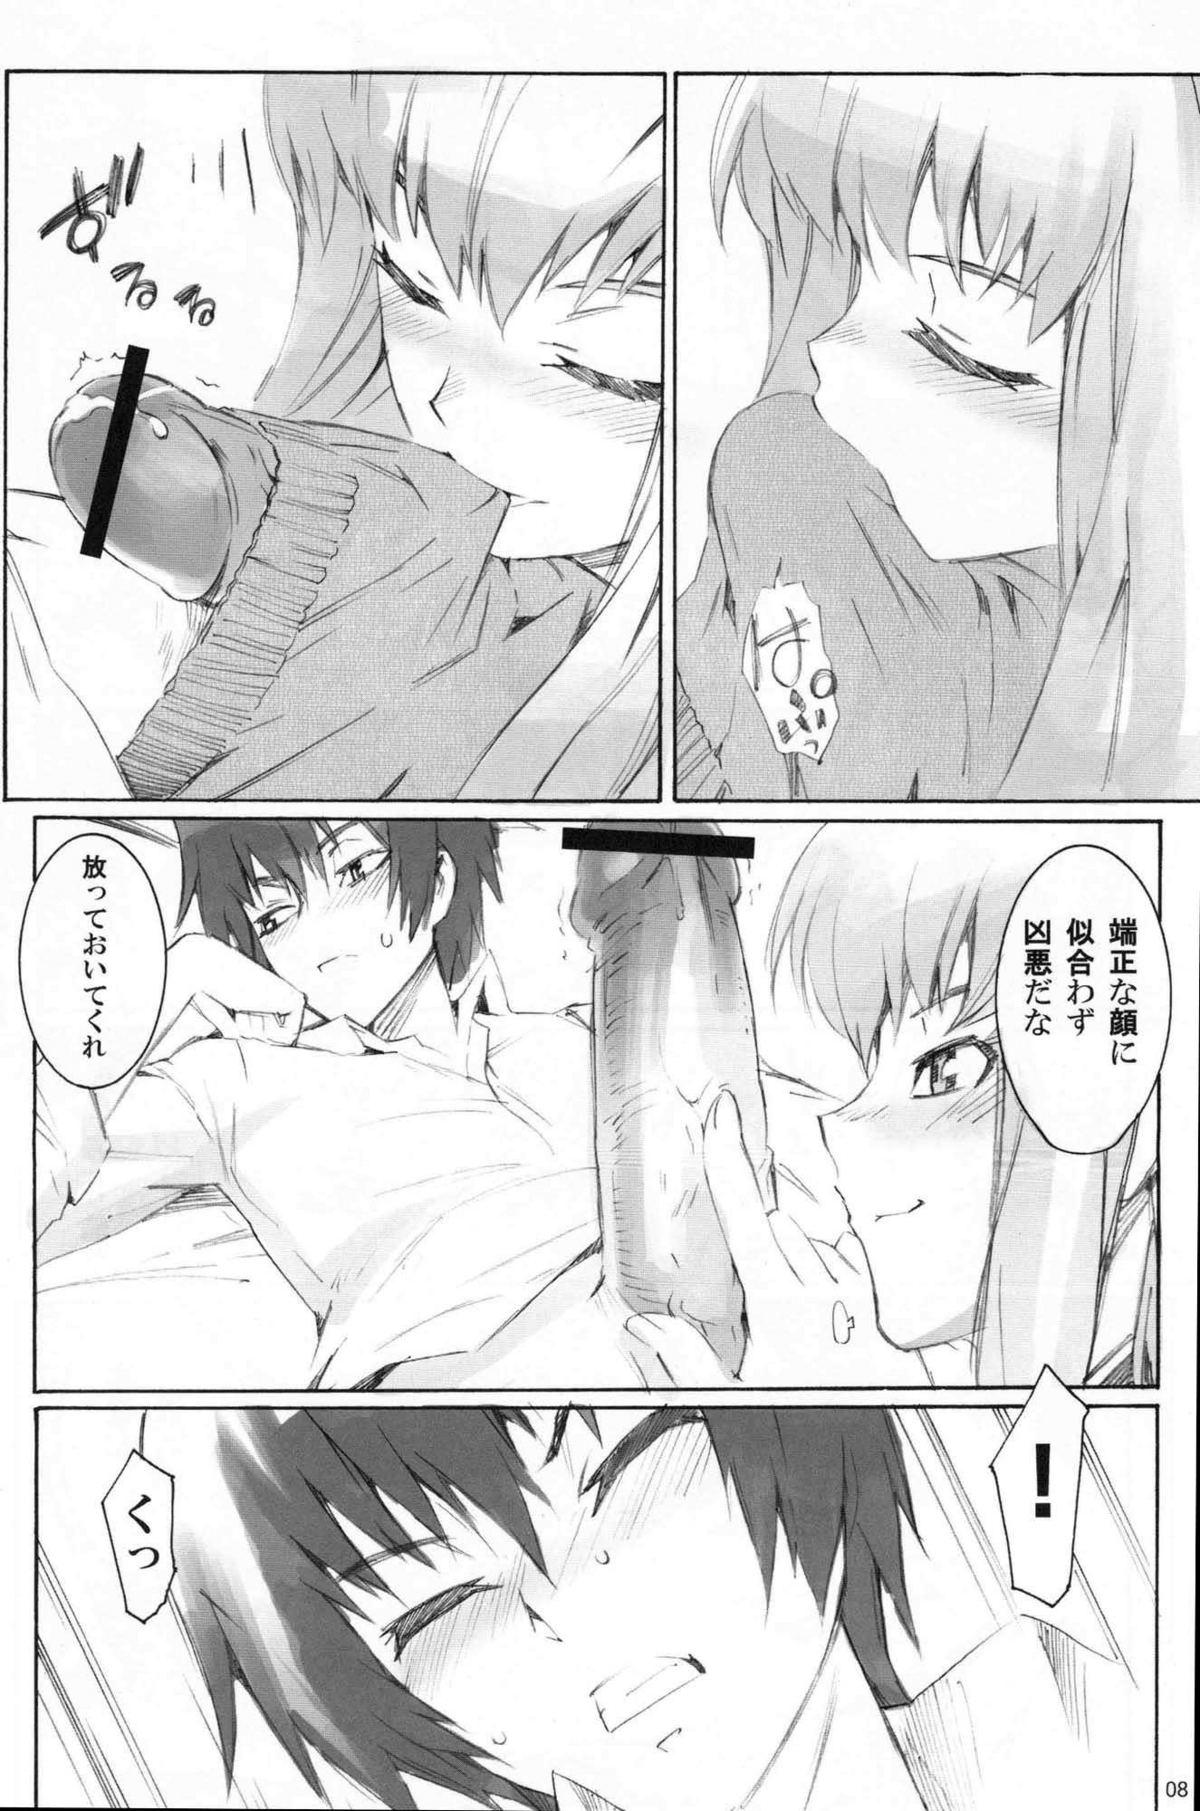 Atm SOULFLY 4 - Code geass Hotfuck - Page 7